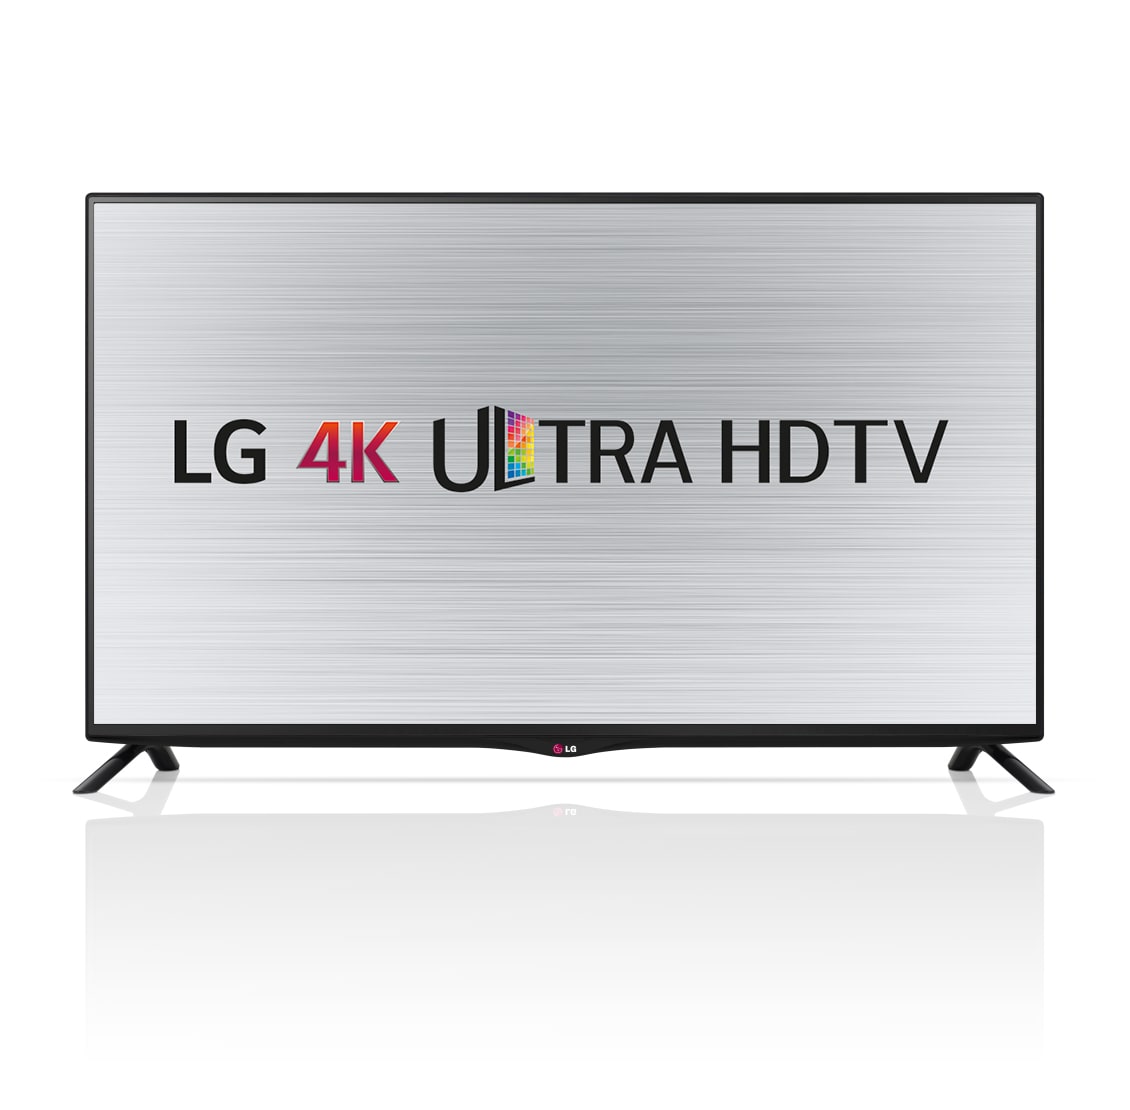 LG 40UB800T 40 UHD TV Unboxing & Preview 